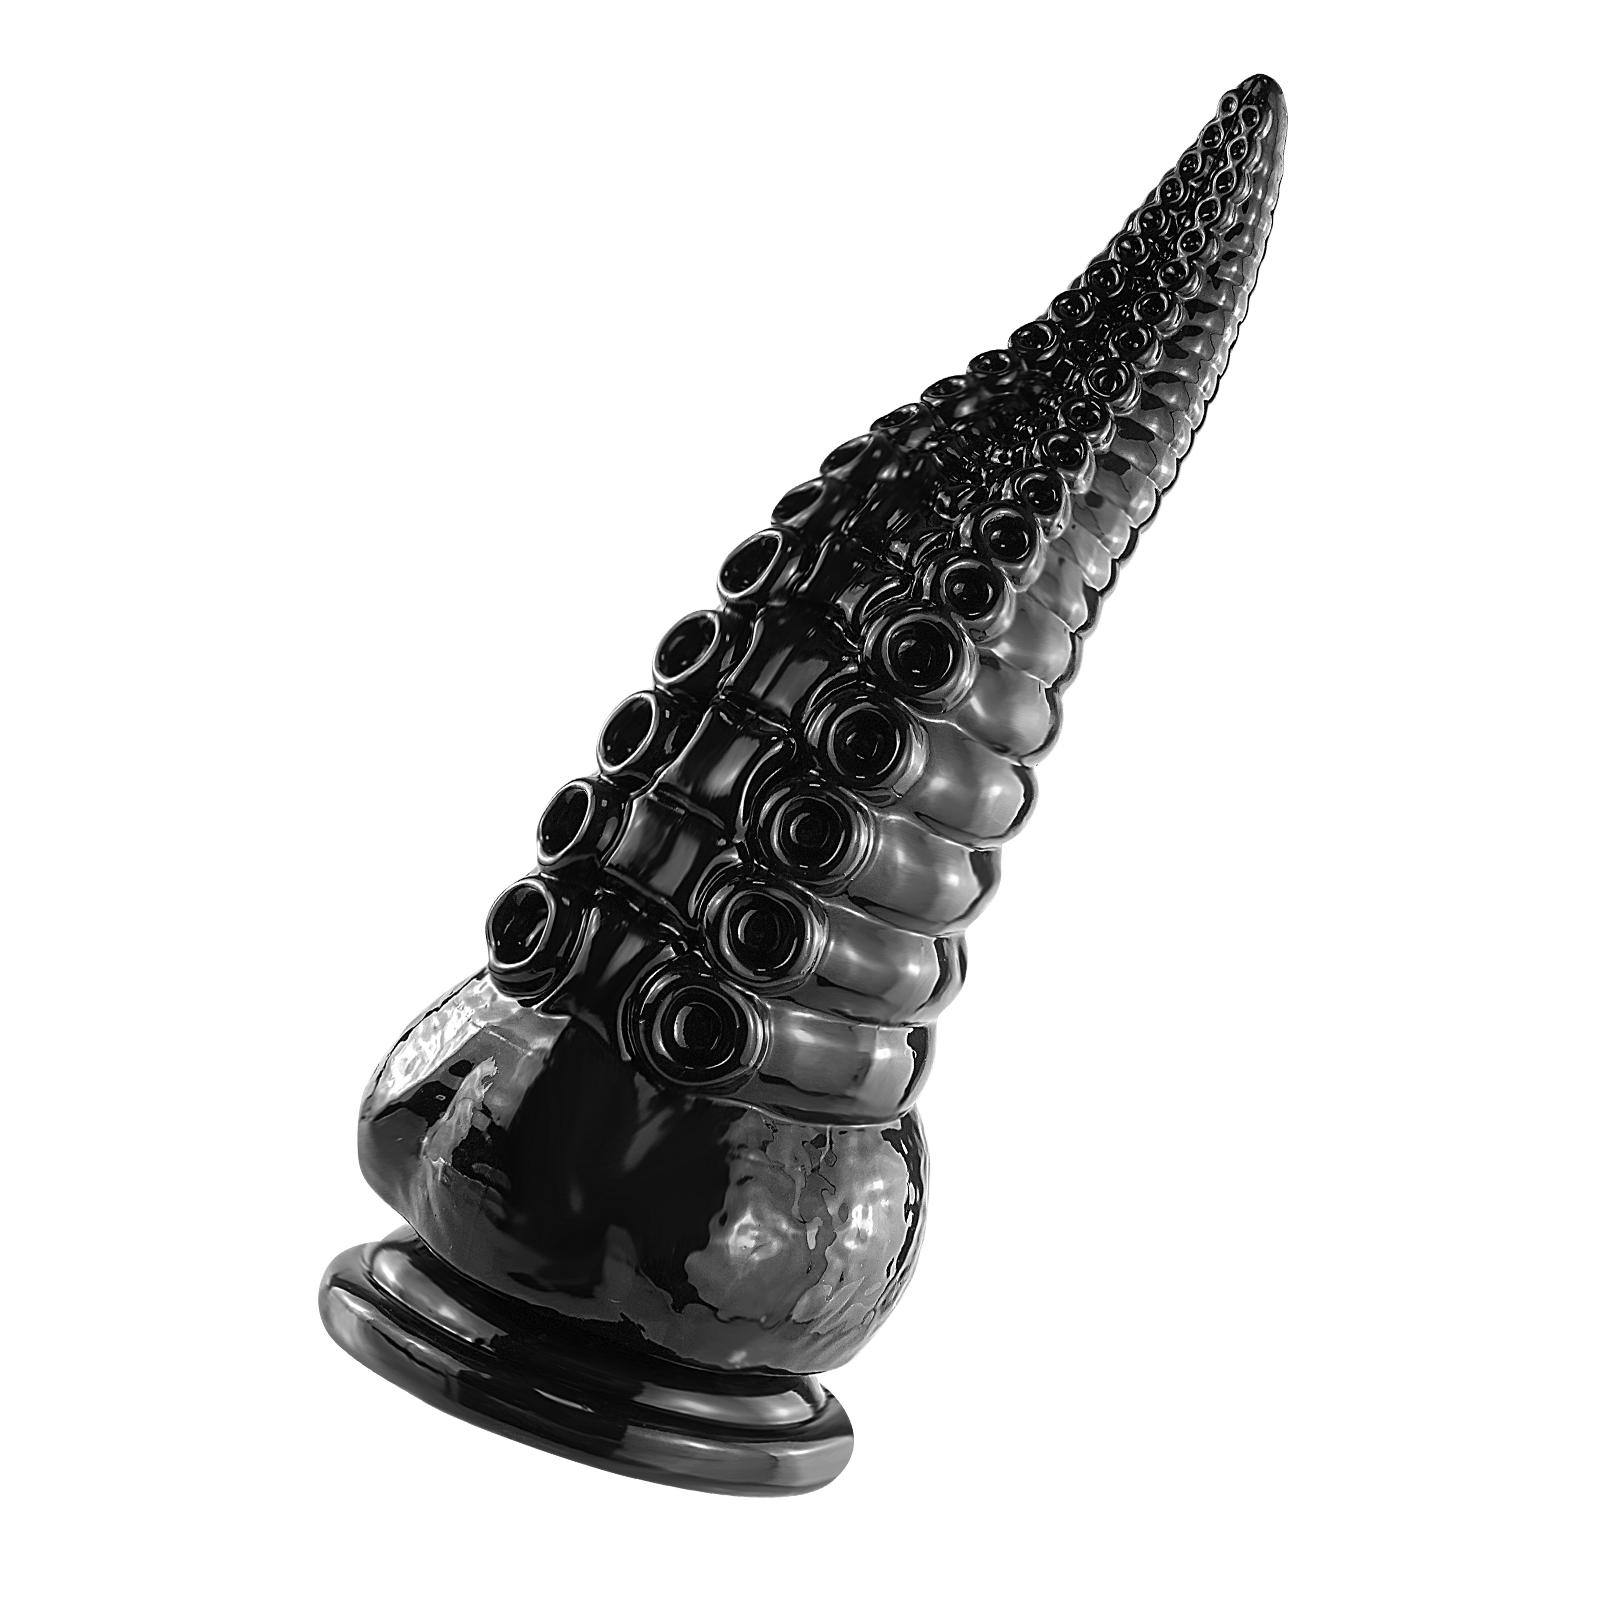 Tentacle Toys,Huge Anal Dildo Of Premium Liquid Silicone,Leyuto Anal Plug Monster Prostate Massager Hand-free Thick Adult Sex